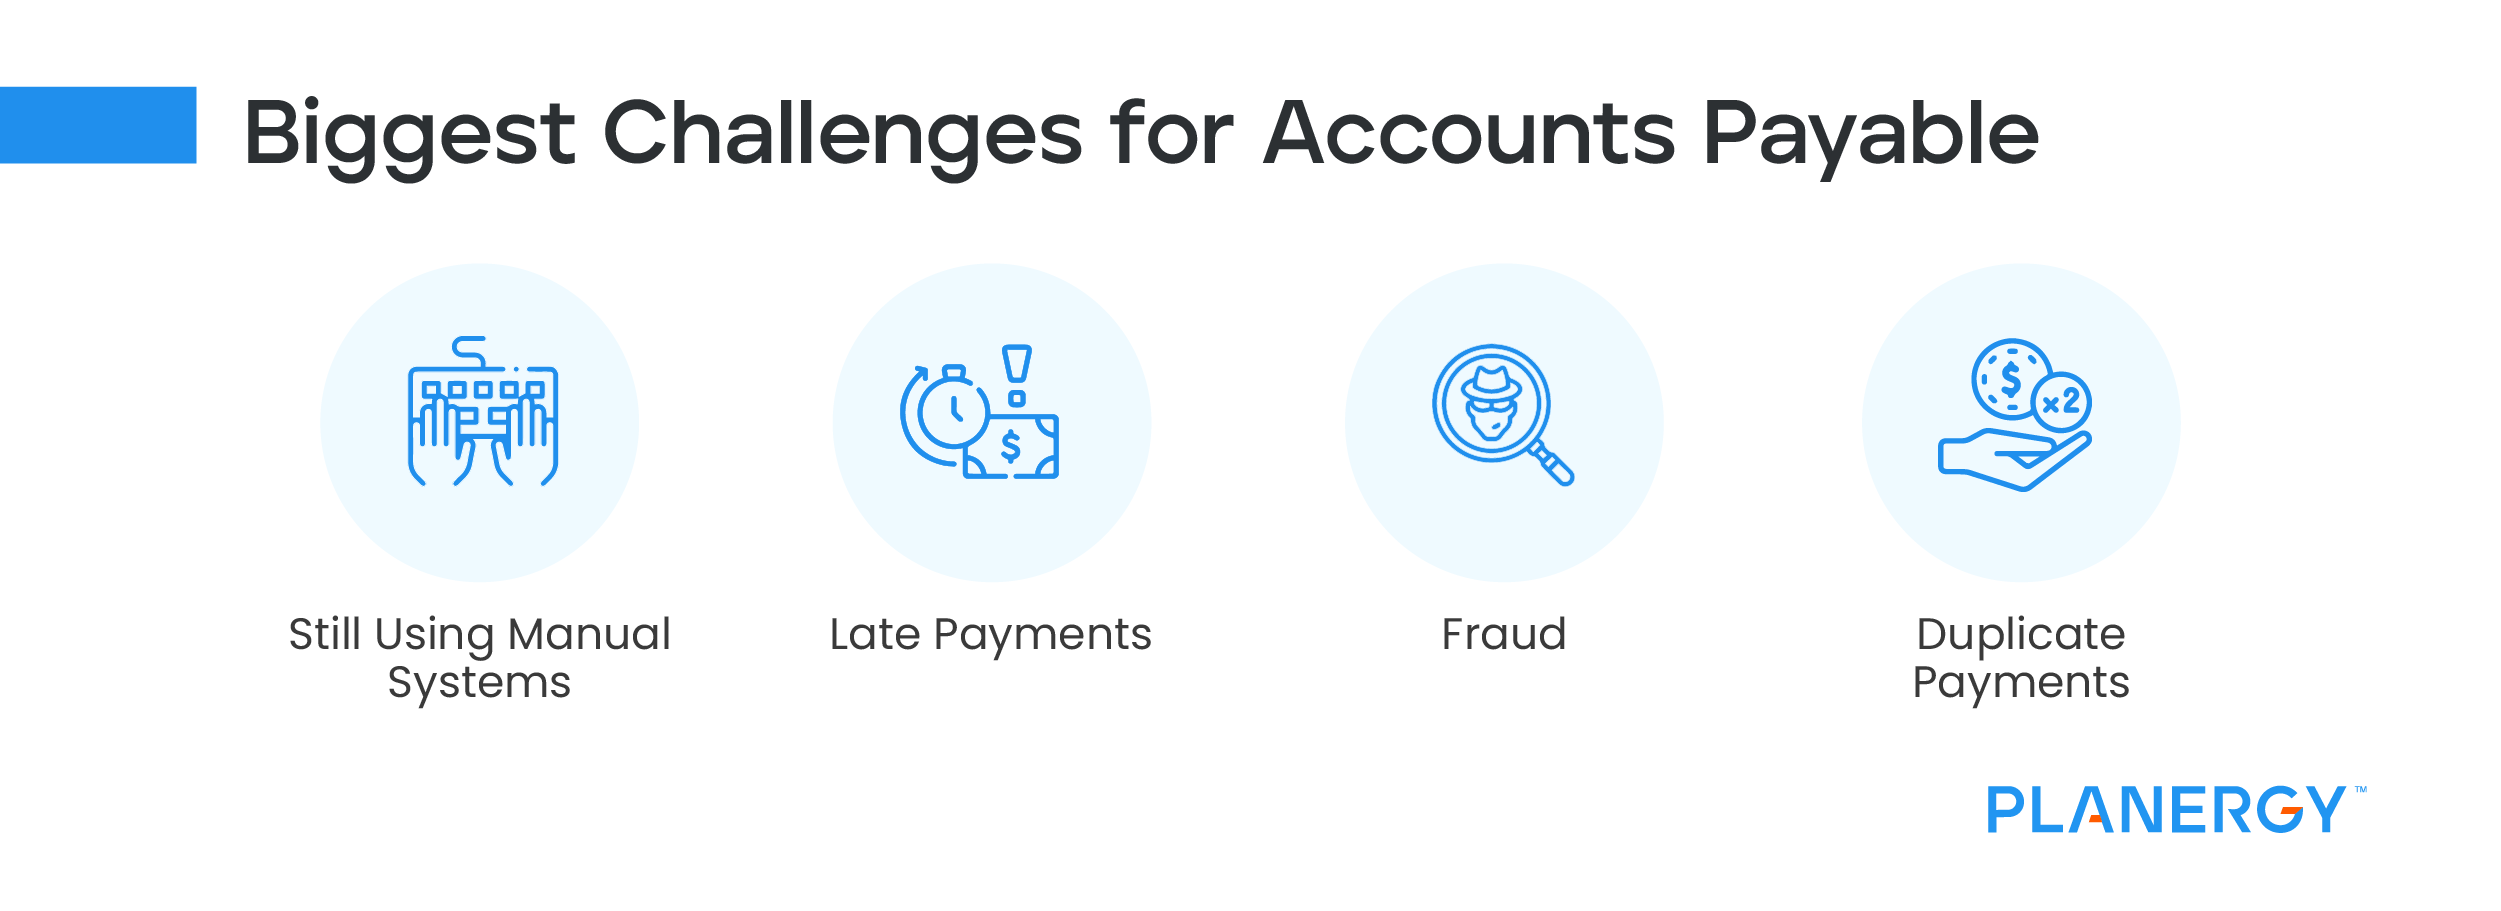 Challenges for Accounts Payable